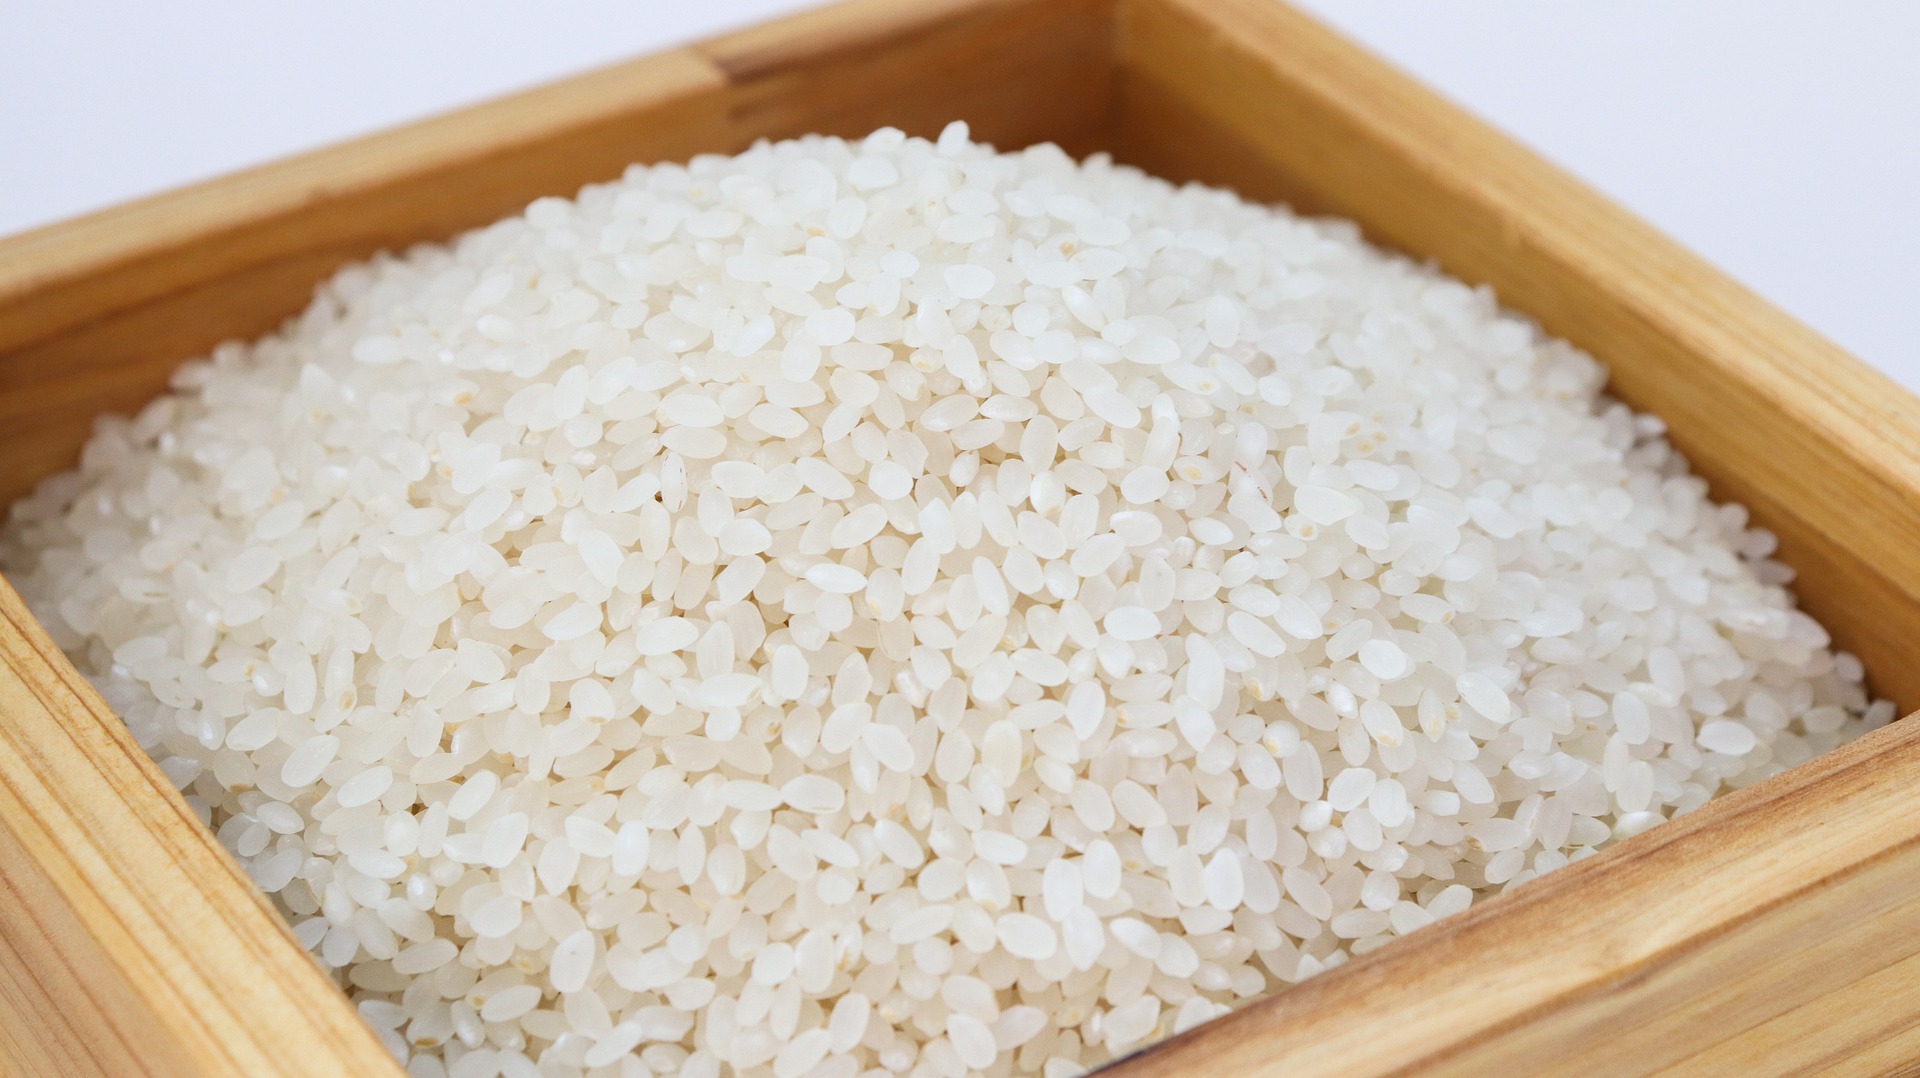 Image of rice in a wooden box